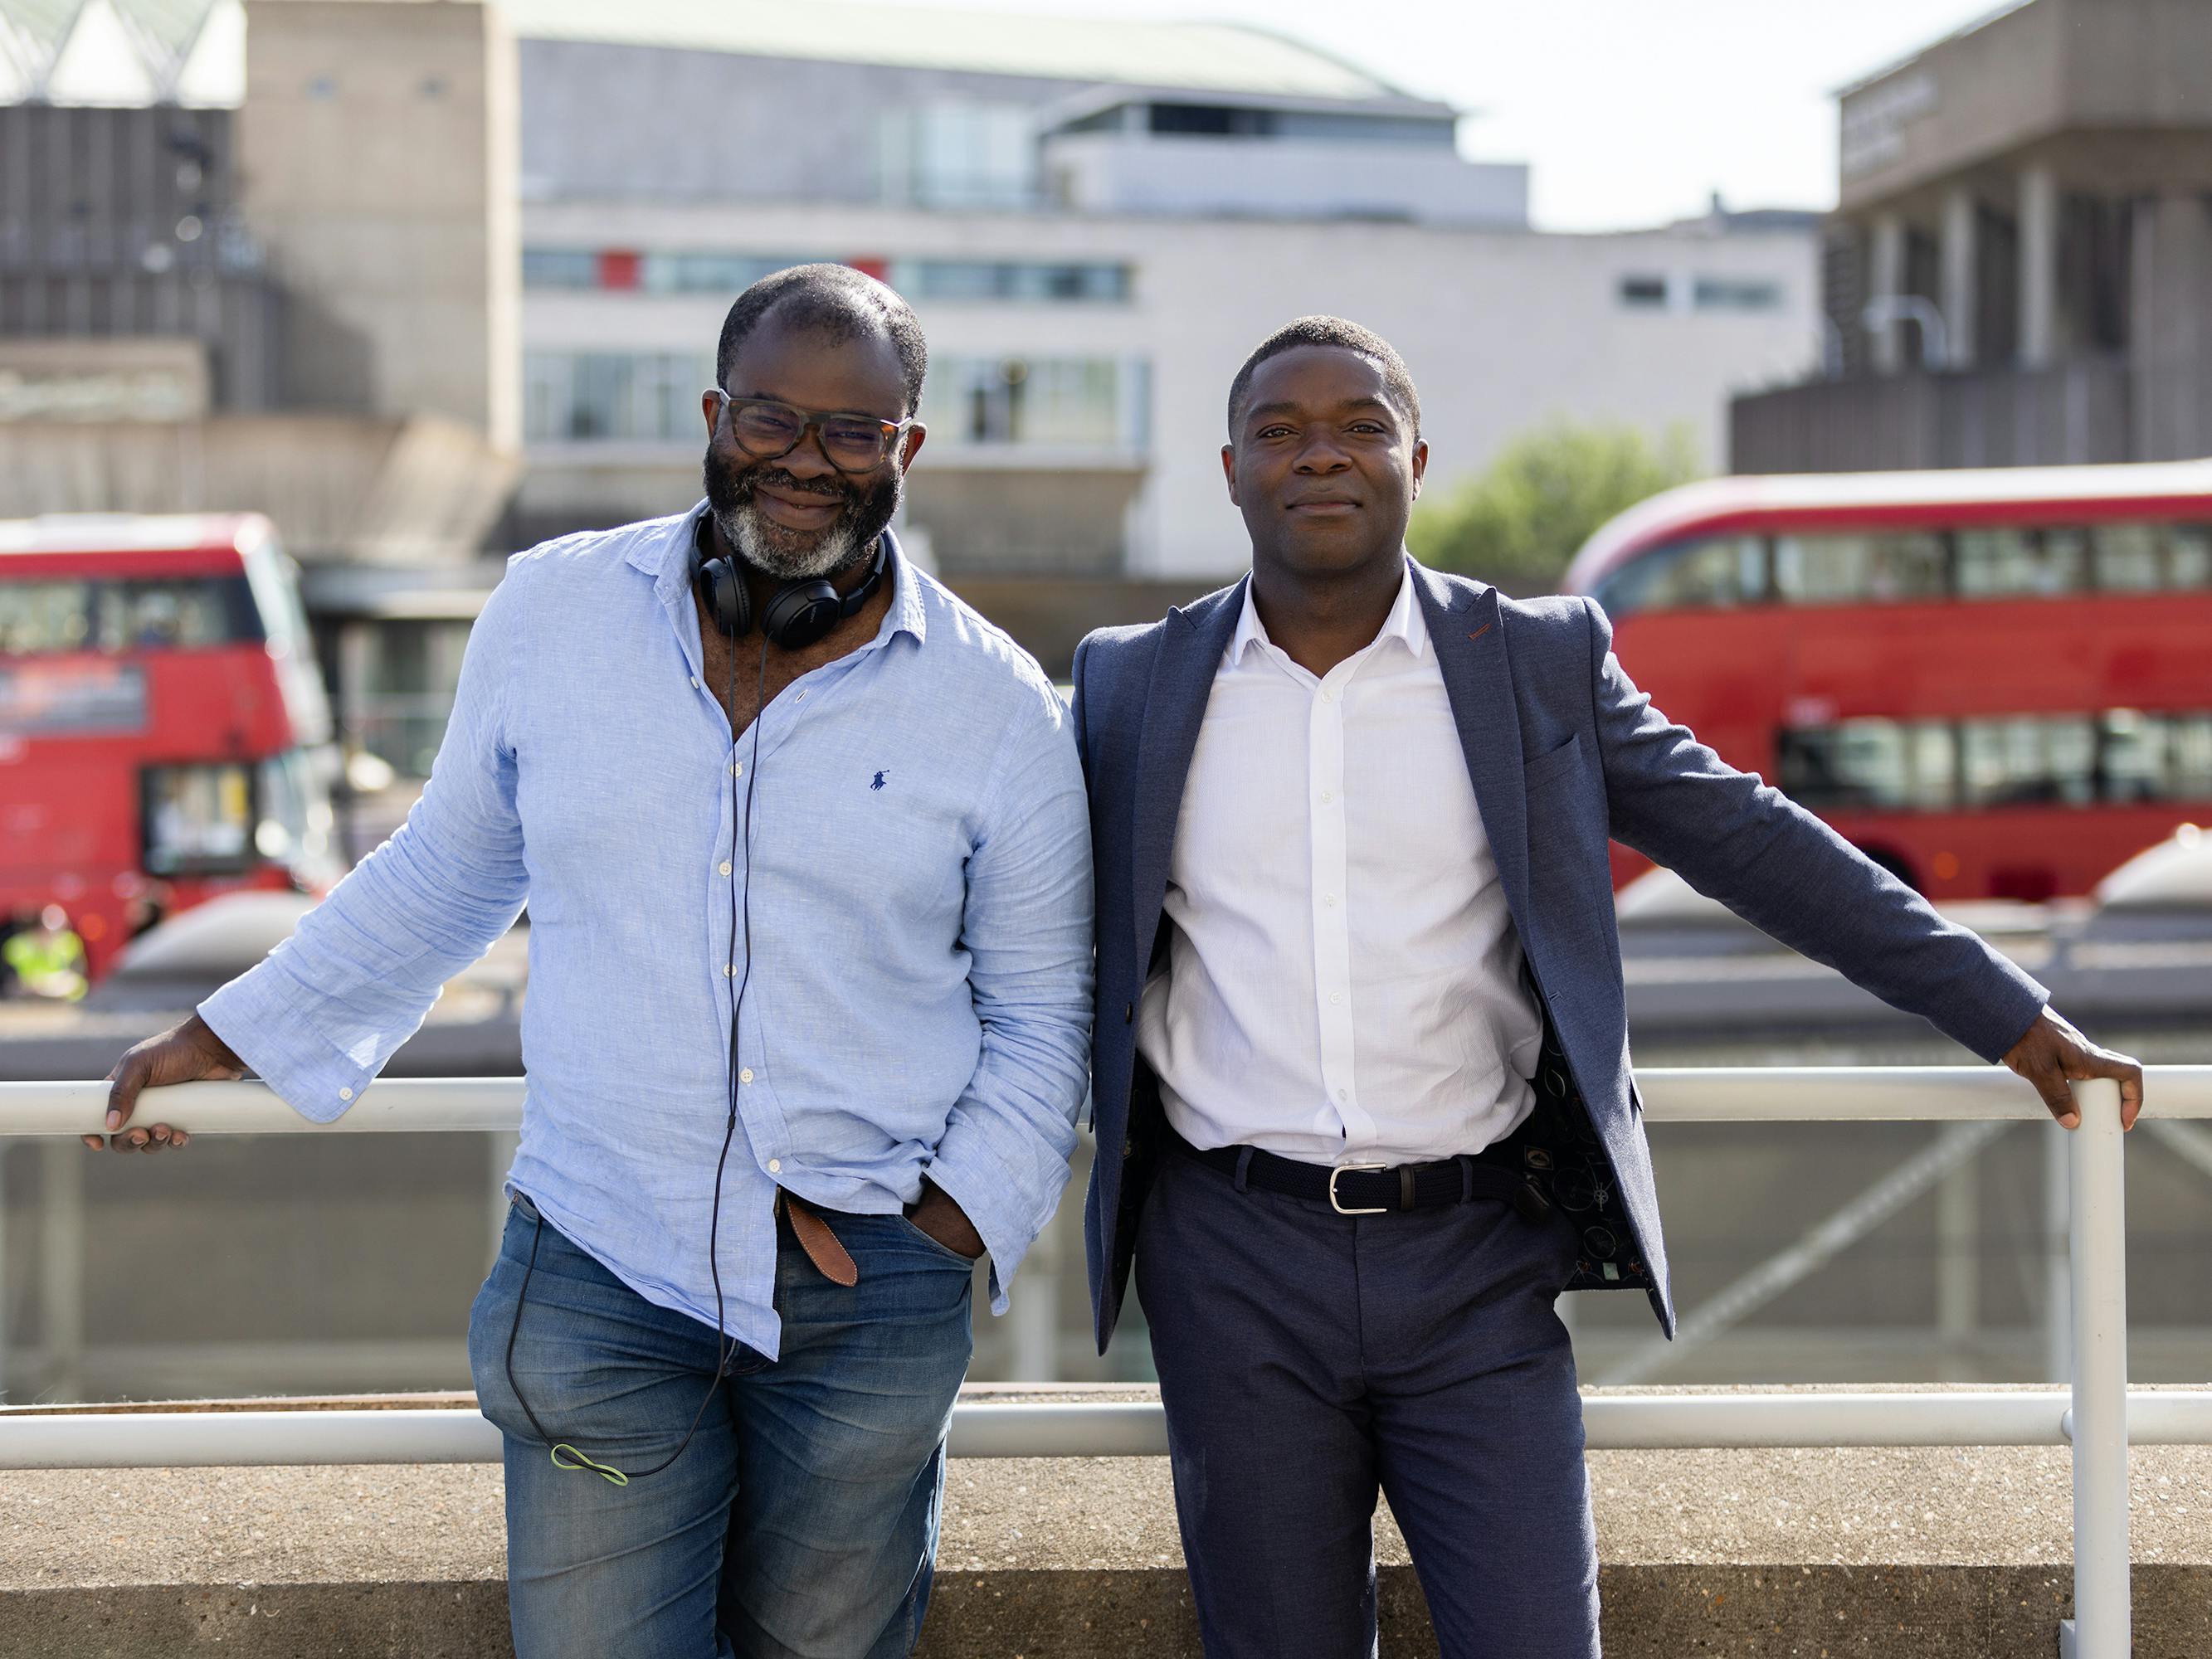 Misan Harriman and David Oyelowo stand together on a bridge. Misan wears a chambray shirt and jeans. David wears a navy suit with a white dress shirt.